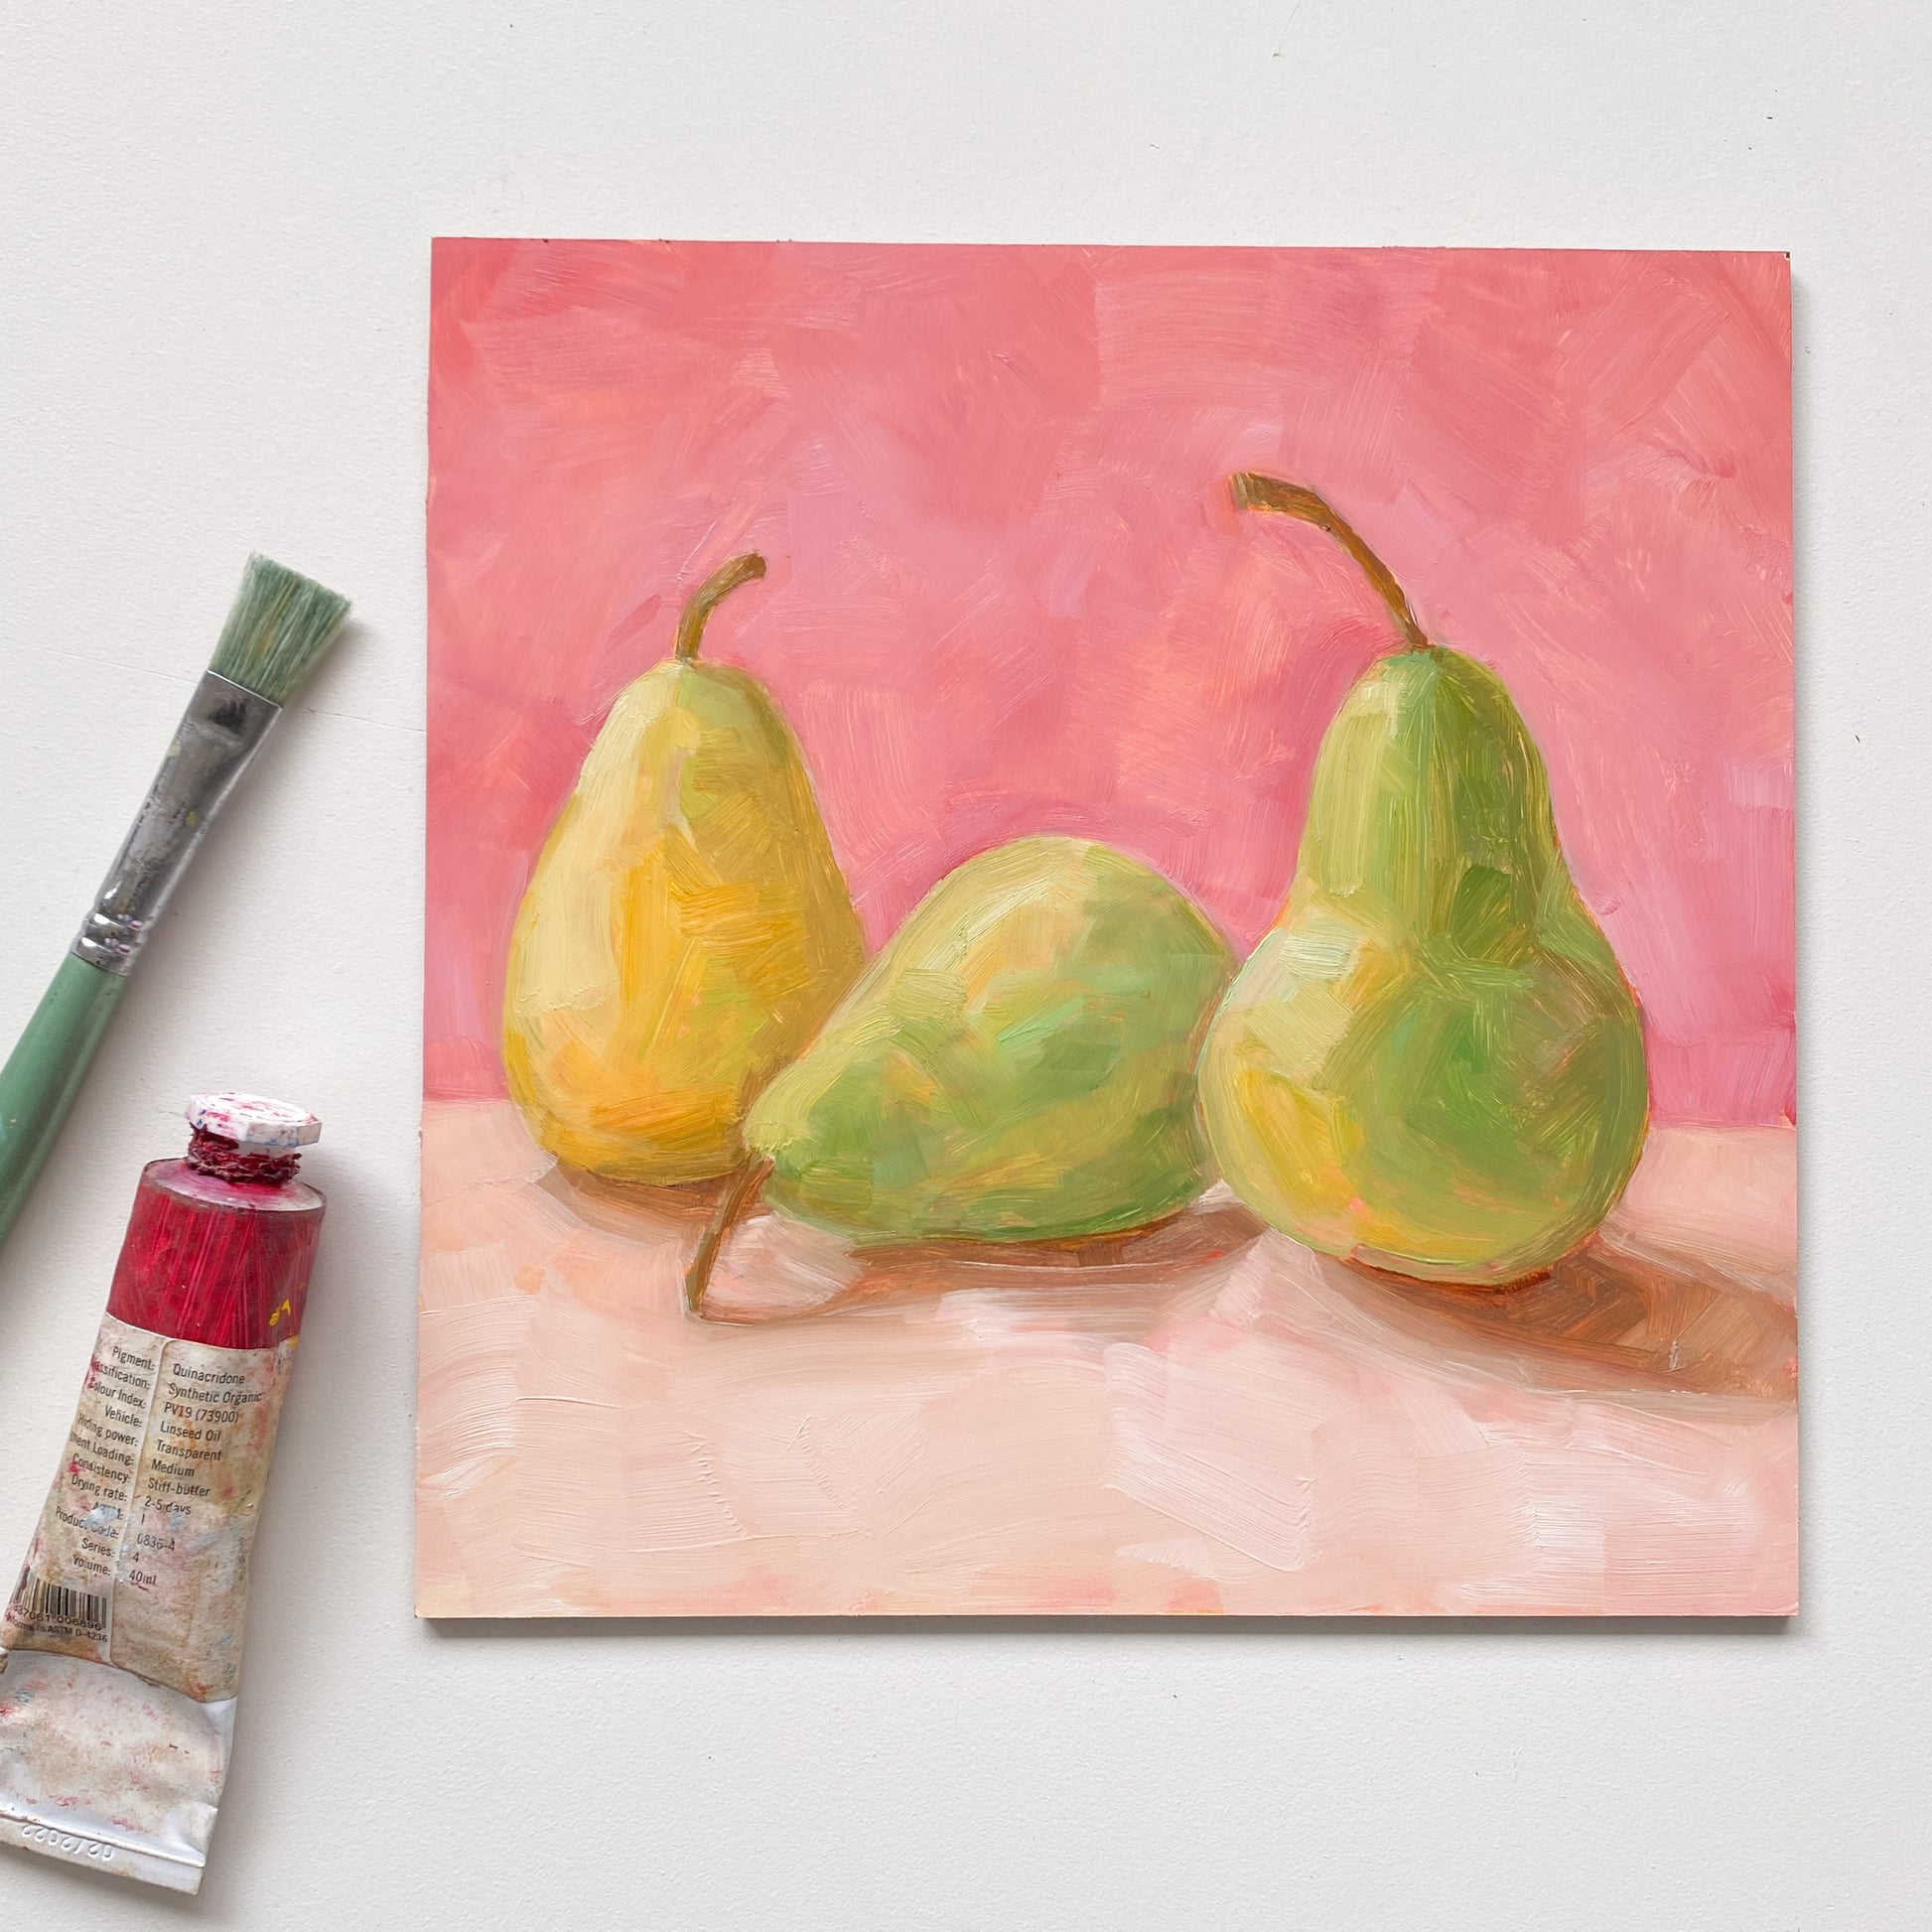 image of an oil painting of two green pears and one yellow pear on a cream surface with a soft and warm pink background. the artwork is on a white table and there is a paint brush and oil paint tube next to it